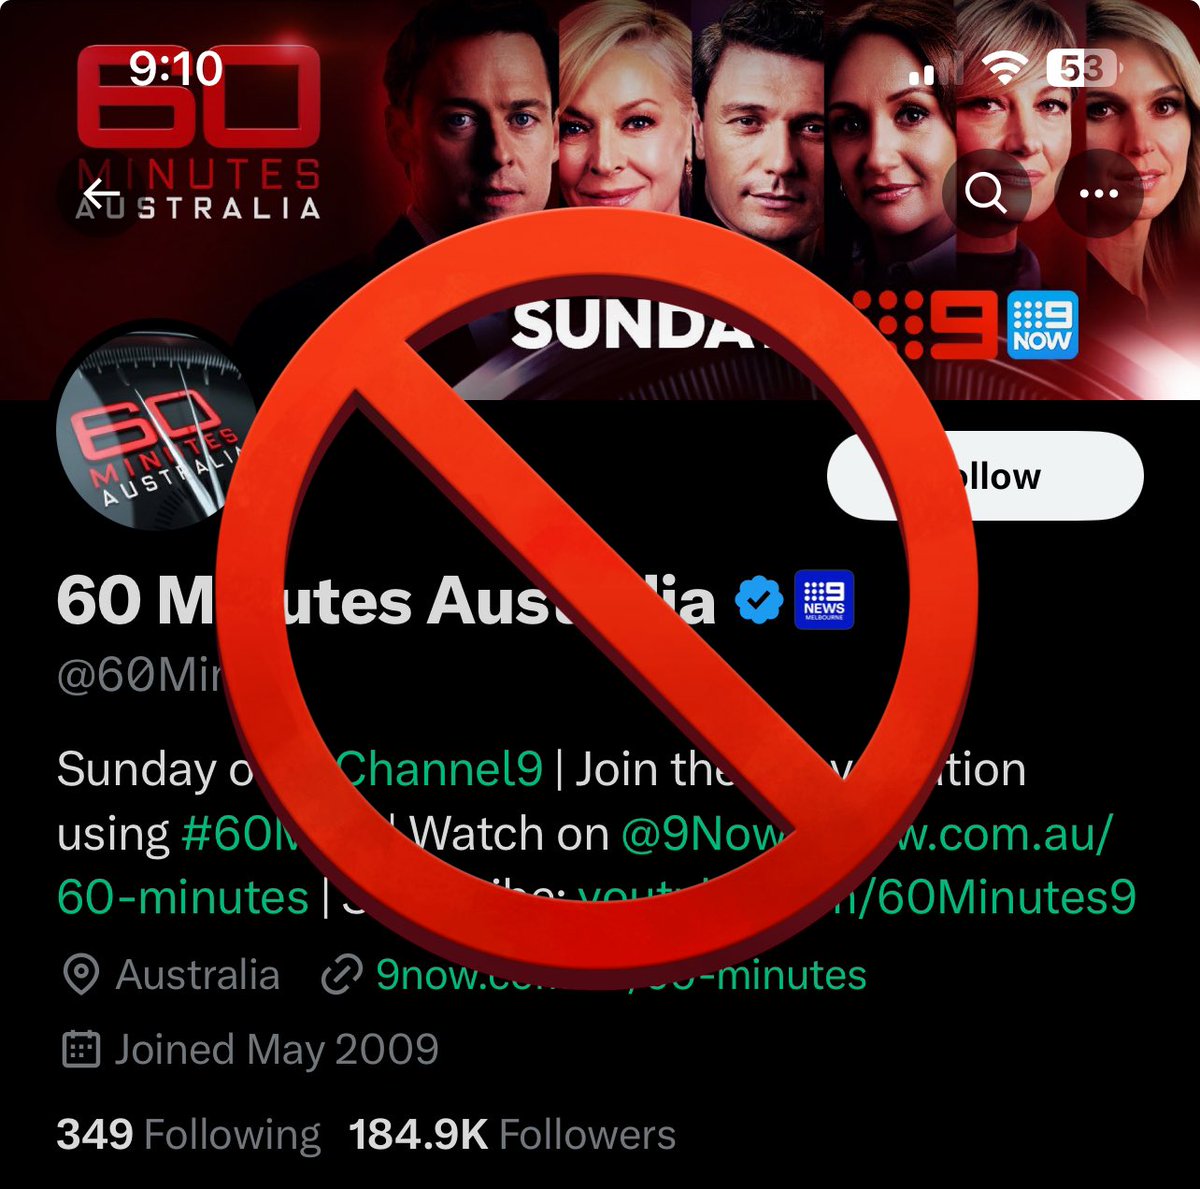 Boycott @60Mins Australia for participating in the invasion of medical privacy & bullying of HRH Catherine, The Princess of Wales, the dehumanising of her as a woman and the scandalmonger reporters using gossip, innuendo & slander to prop up a failing program with washed up…